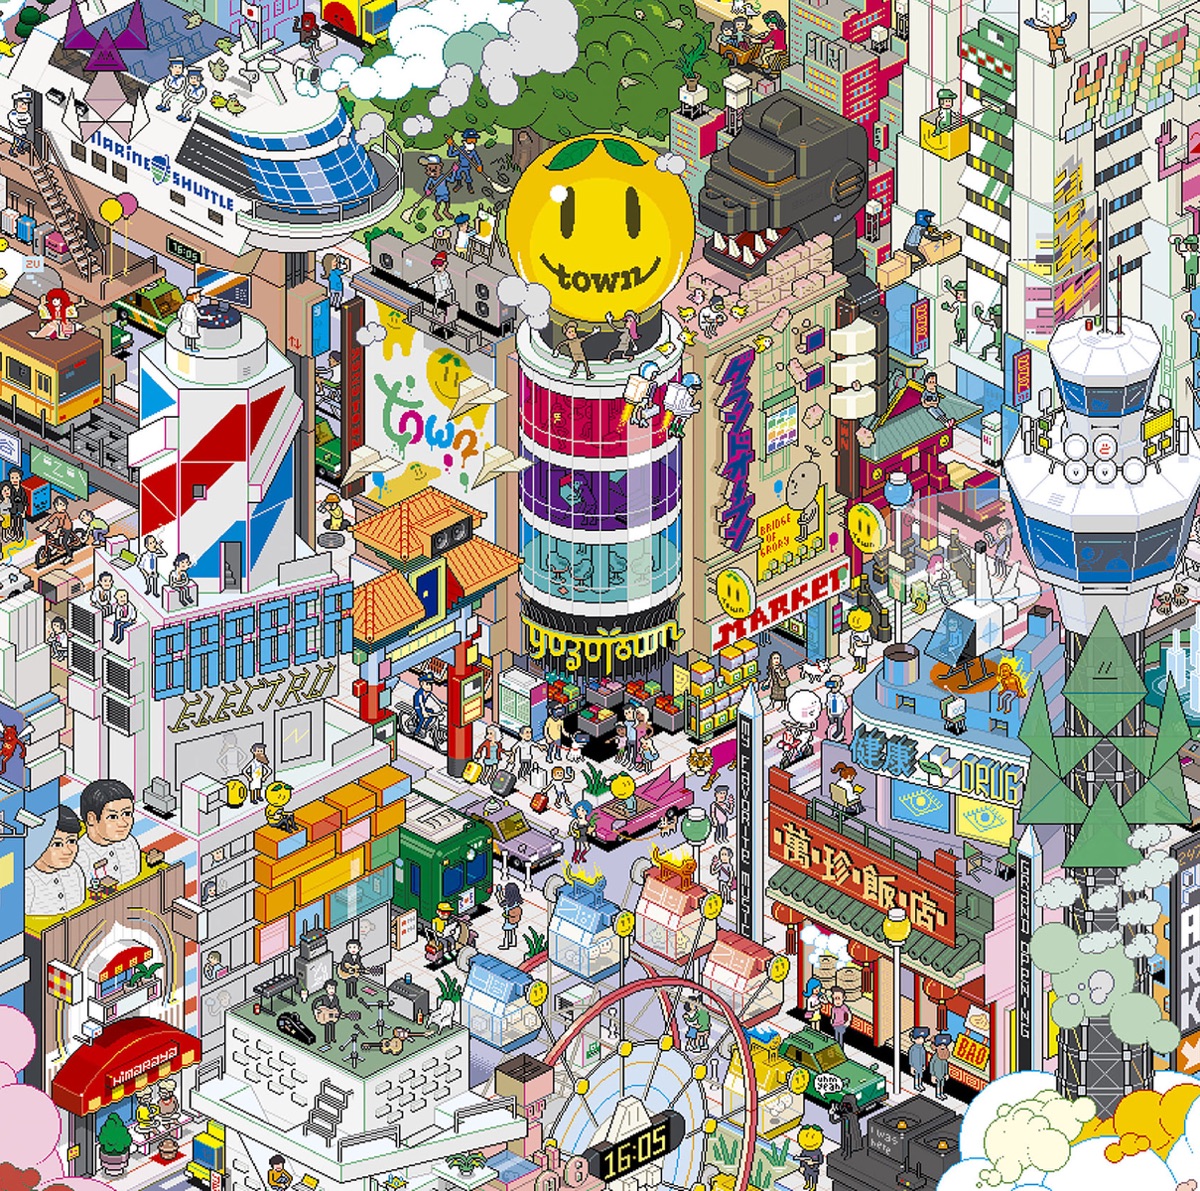 Cover art for『YUZU - Chinatown』from the release『YUZUTOWN』